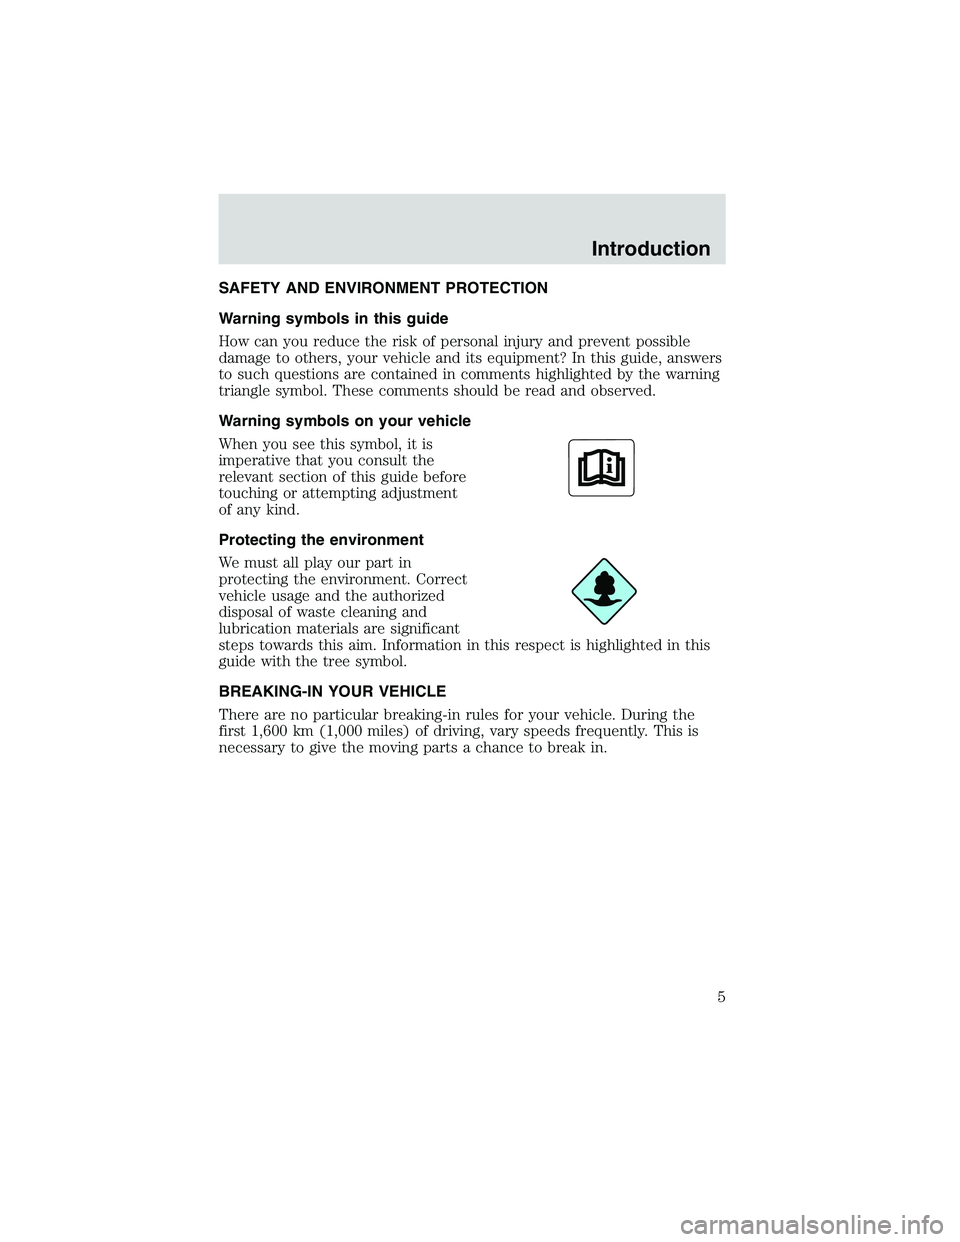 MAZDA MODEL B3000 4WD 2002  Owners Manual SAFETY AND ENVIRONMENT PROTECTION
Warning symbols in this guide
How can you reduce the risk of personal injury and prevent possible
damage to others, your vehicle and its equipment? In this guide, ans